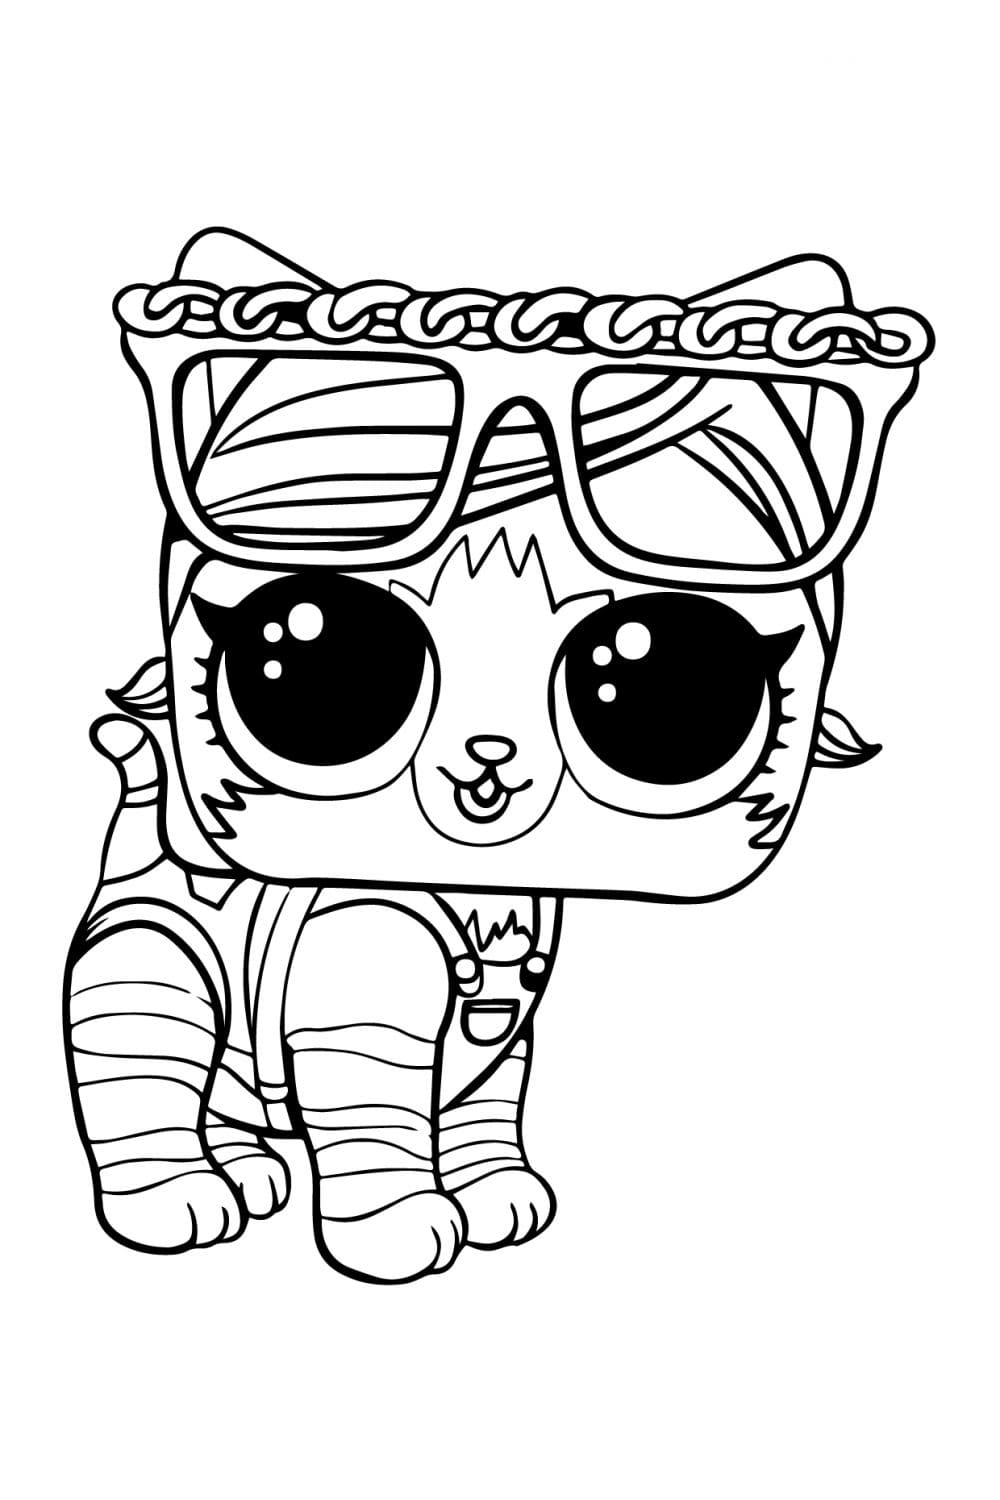 LOL Pets Kitten Coloring Page - Free Printable Coloring Pages for Kids